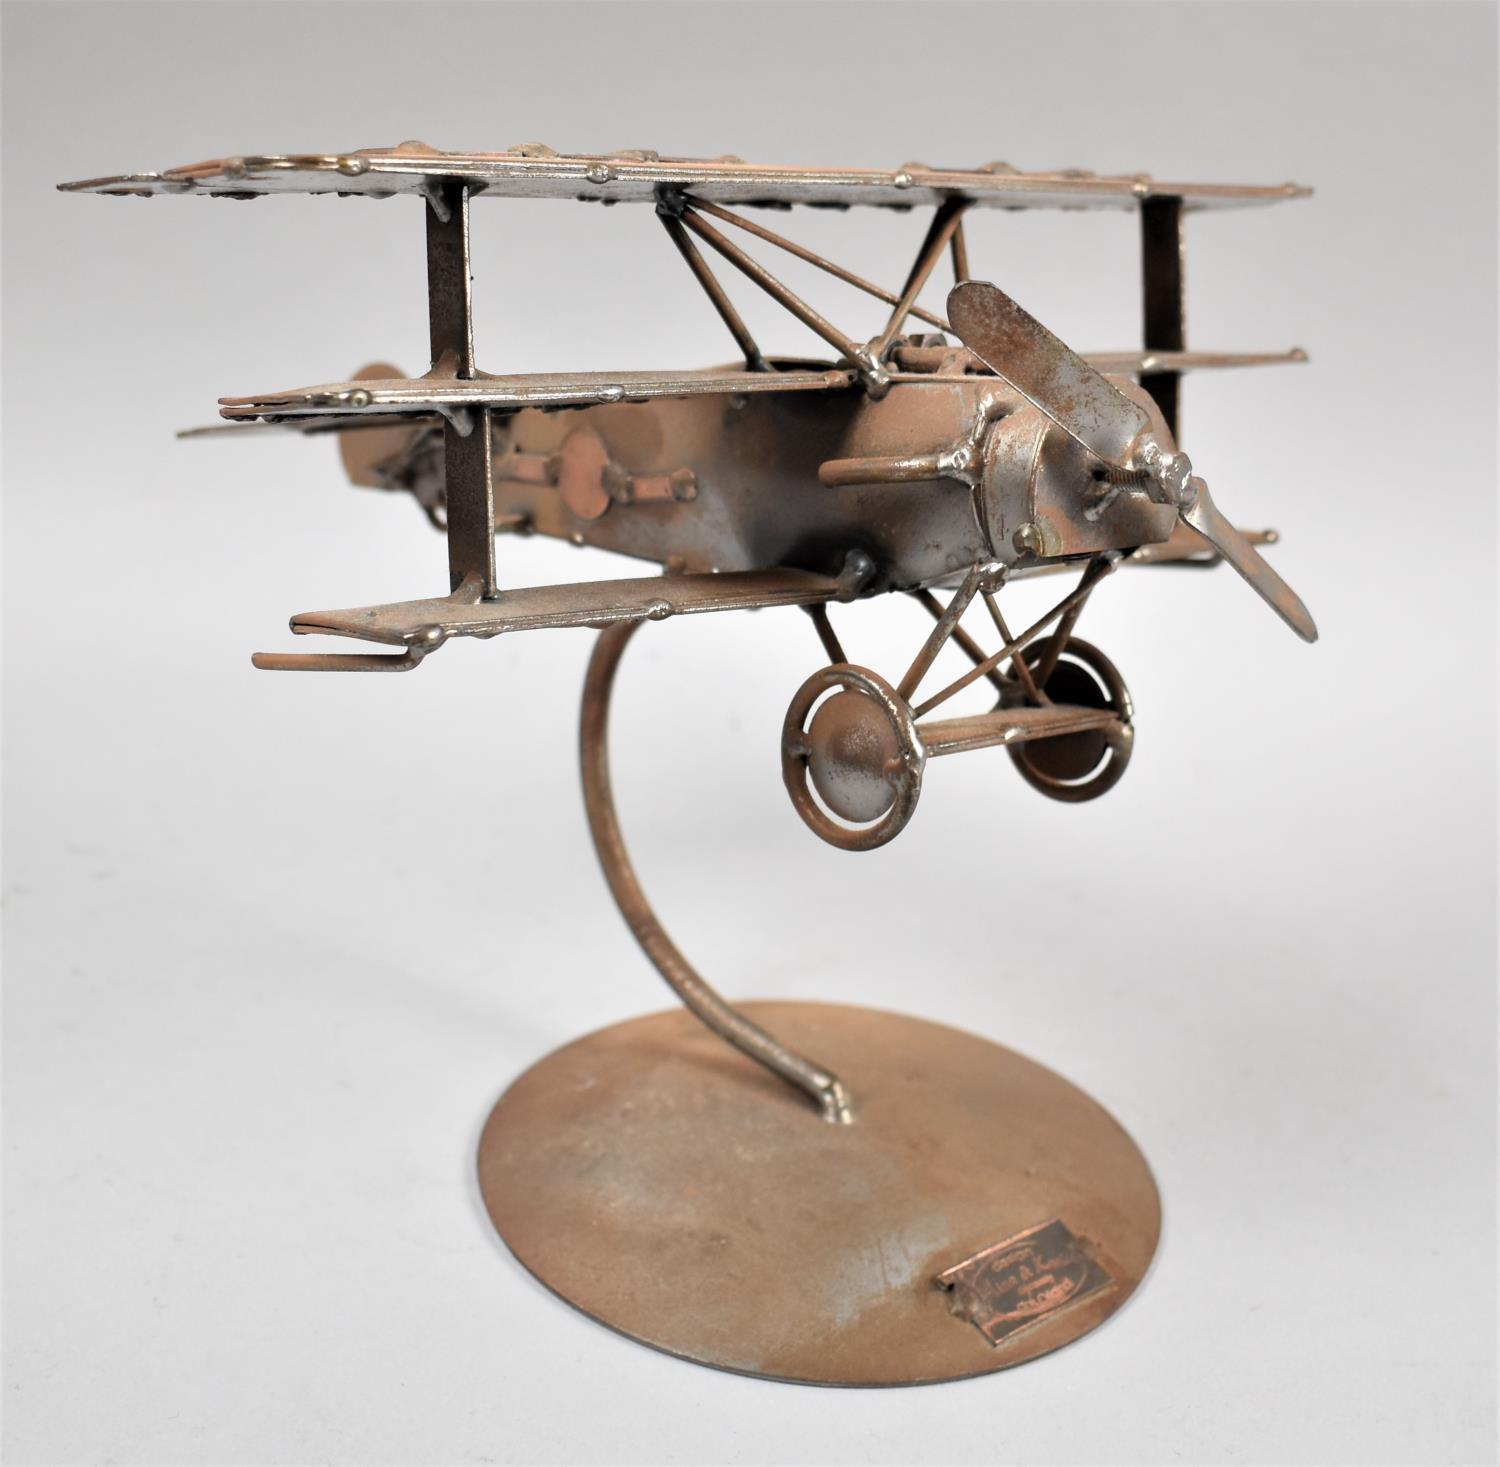 A Metal Model of the Red Baron Fokker Plane by Hinz & Kunst on Circular Plinth, 20cm high